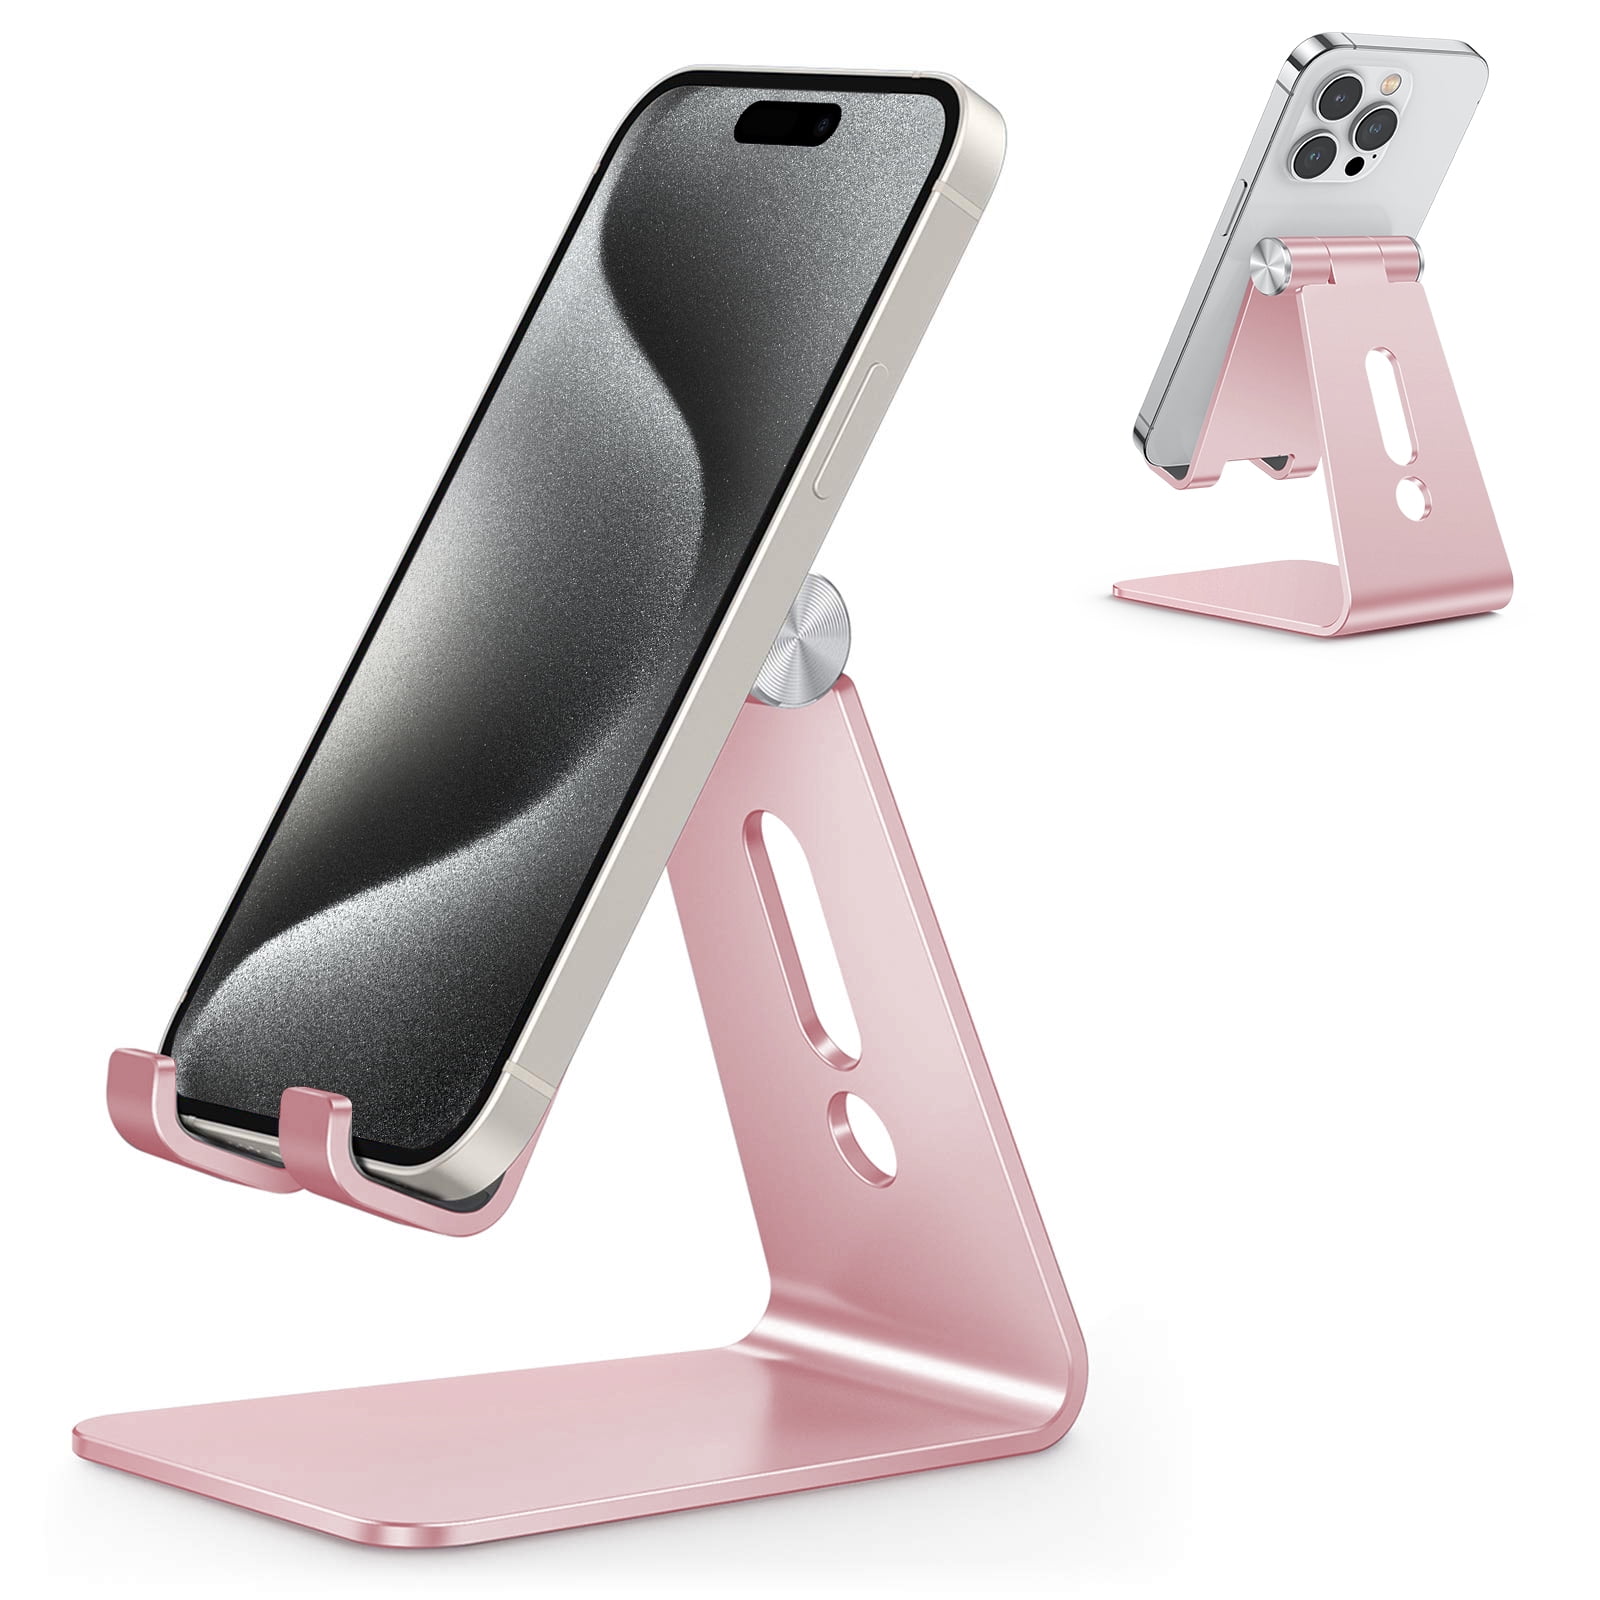 OMOTON Upgraded Aluminum Cell Phone Stand, C1 Durable Cellphone Dock with  Protective Pads, Smart Stand Designed for iPhone 15, 14/13/12/11 Pro Max XR